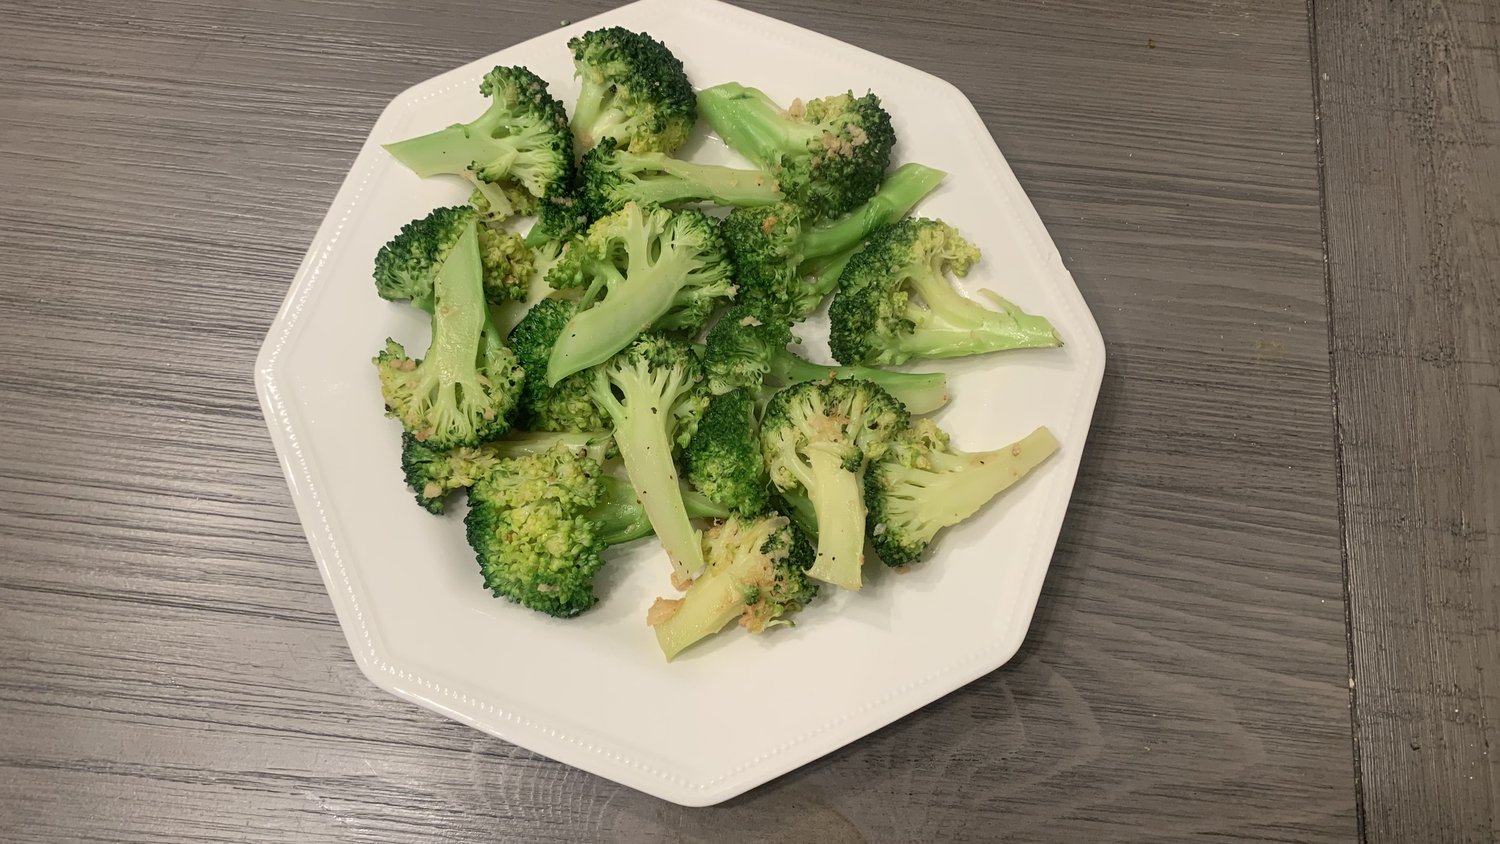 Easy Steps to Make Garlic Butter Broccoli at Home